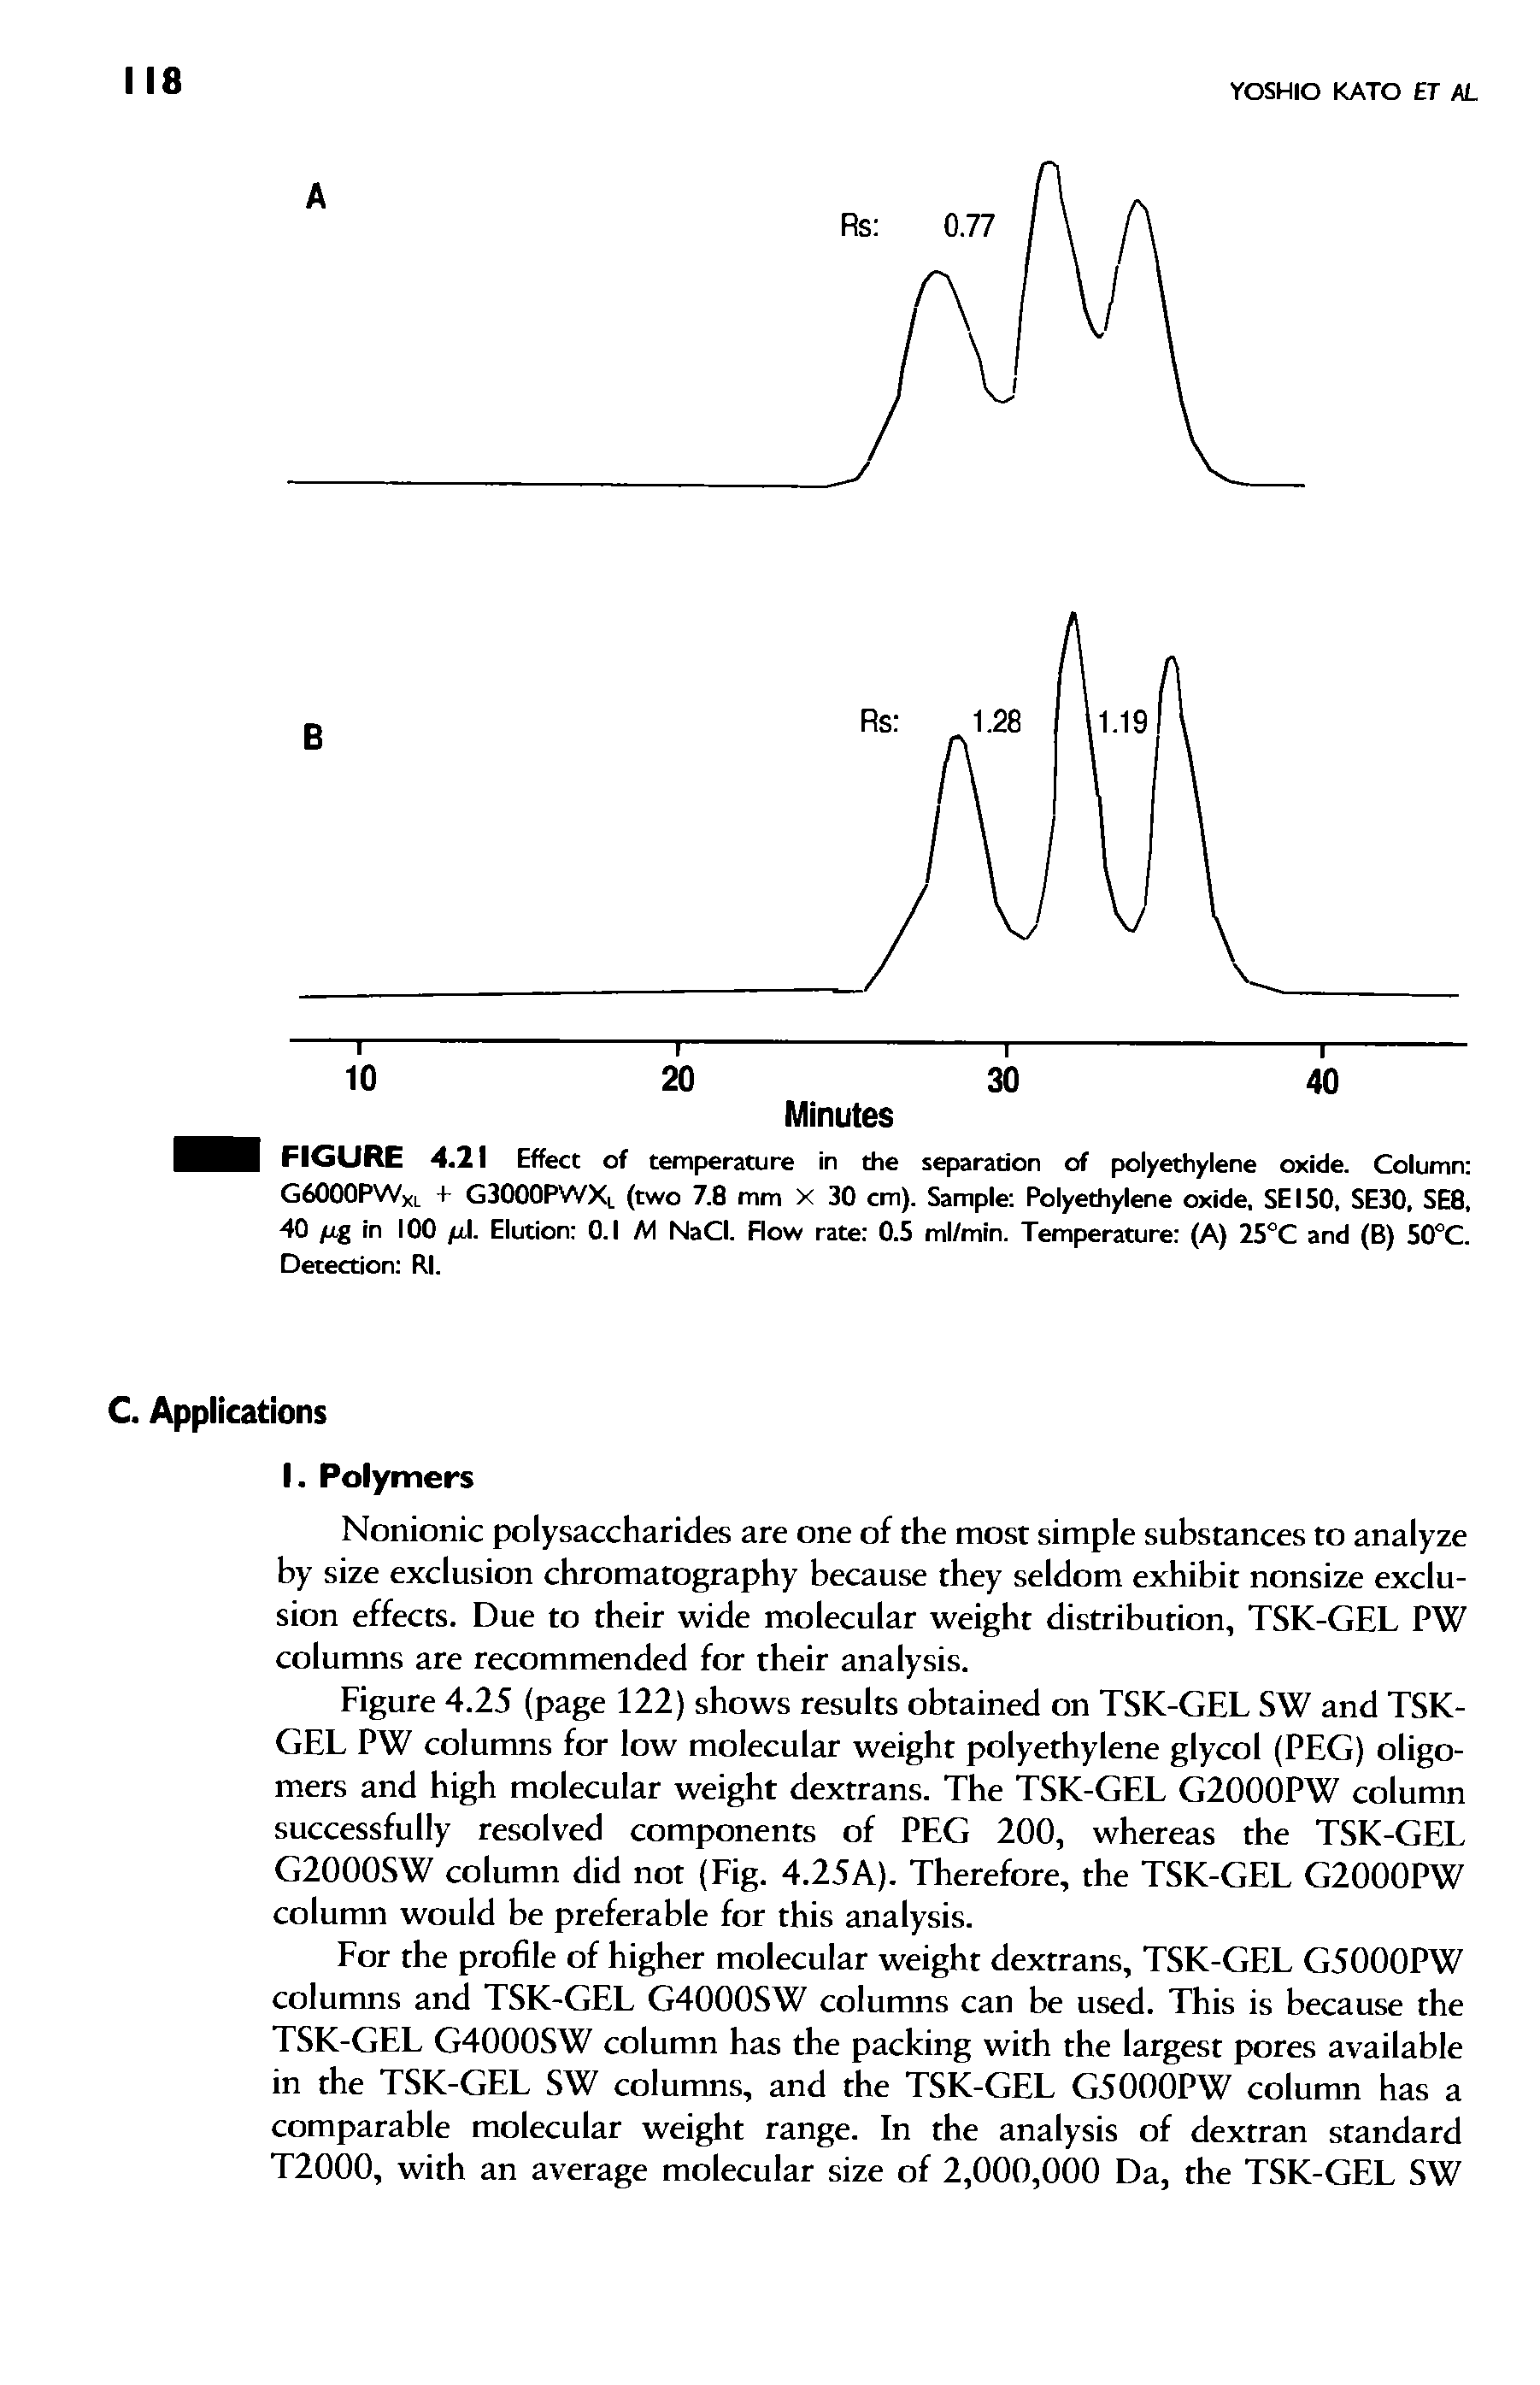 Figure 4.25 (page 122) shows results obtained on TSK-GEL SW and TSK-GEL PW columns for low molecular weight polyethylene glycol (PEG) oligomers and high molecular weight dextrans. The TSK-GEL G2000PW column successfully resolved components of PEG 200, whereas the TSK-GEL G2000SW column did not (Fig. 4.25A). Therefore, the TSK-GEL G2000PW column would be preferable for this analysis.